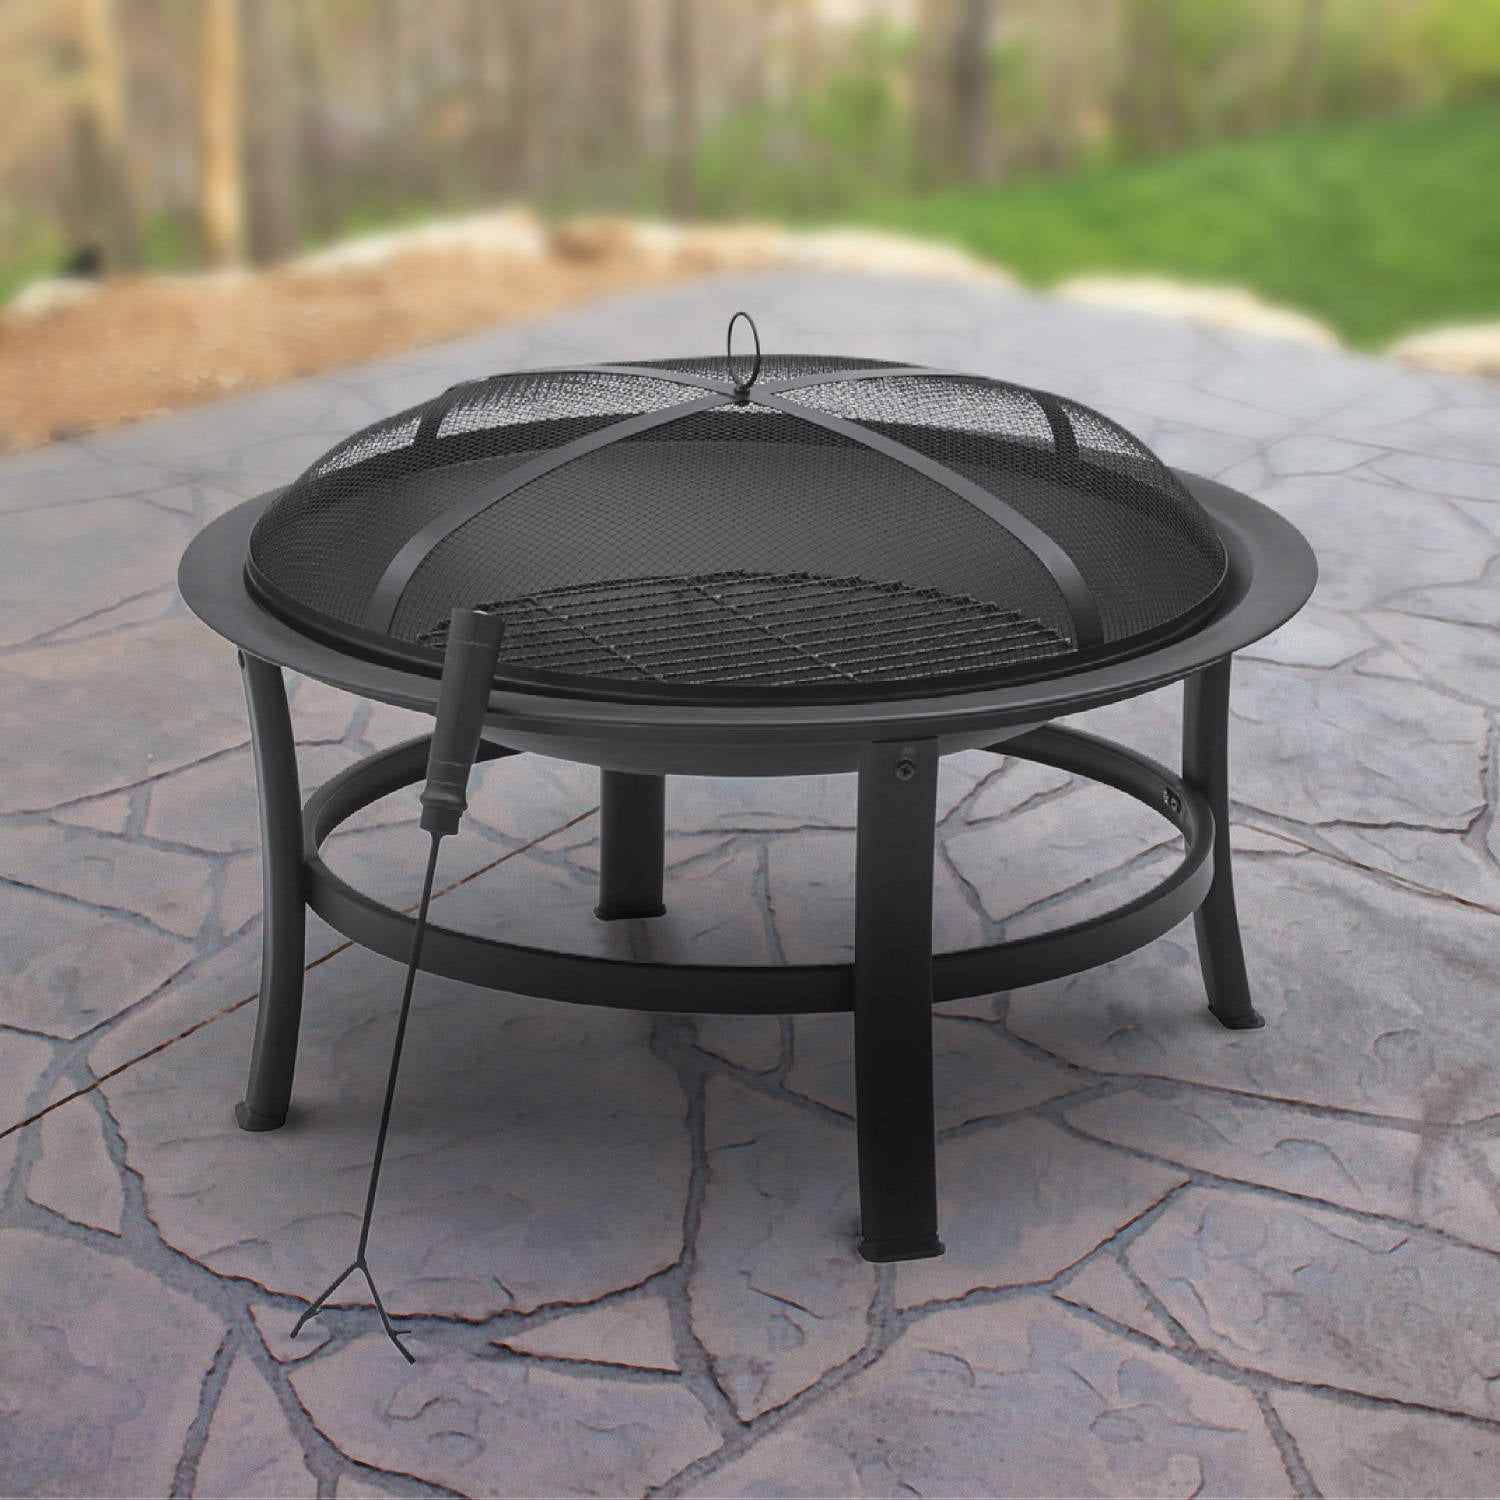 Mainstays 30 Fire Pit Black Com, 30 Inch Fire Pit Table